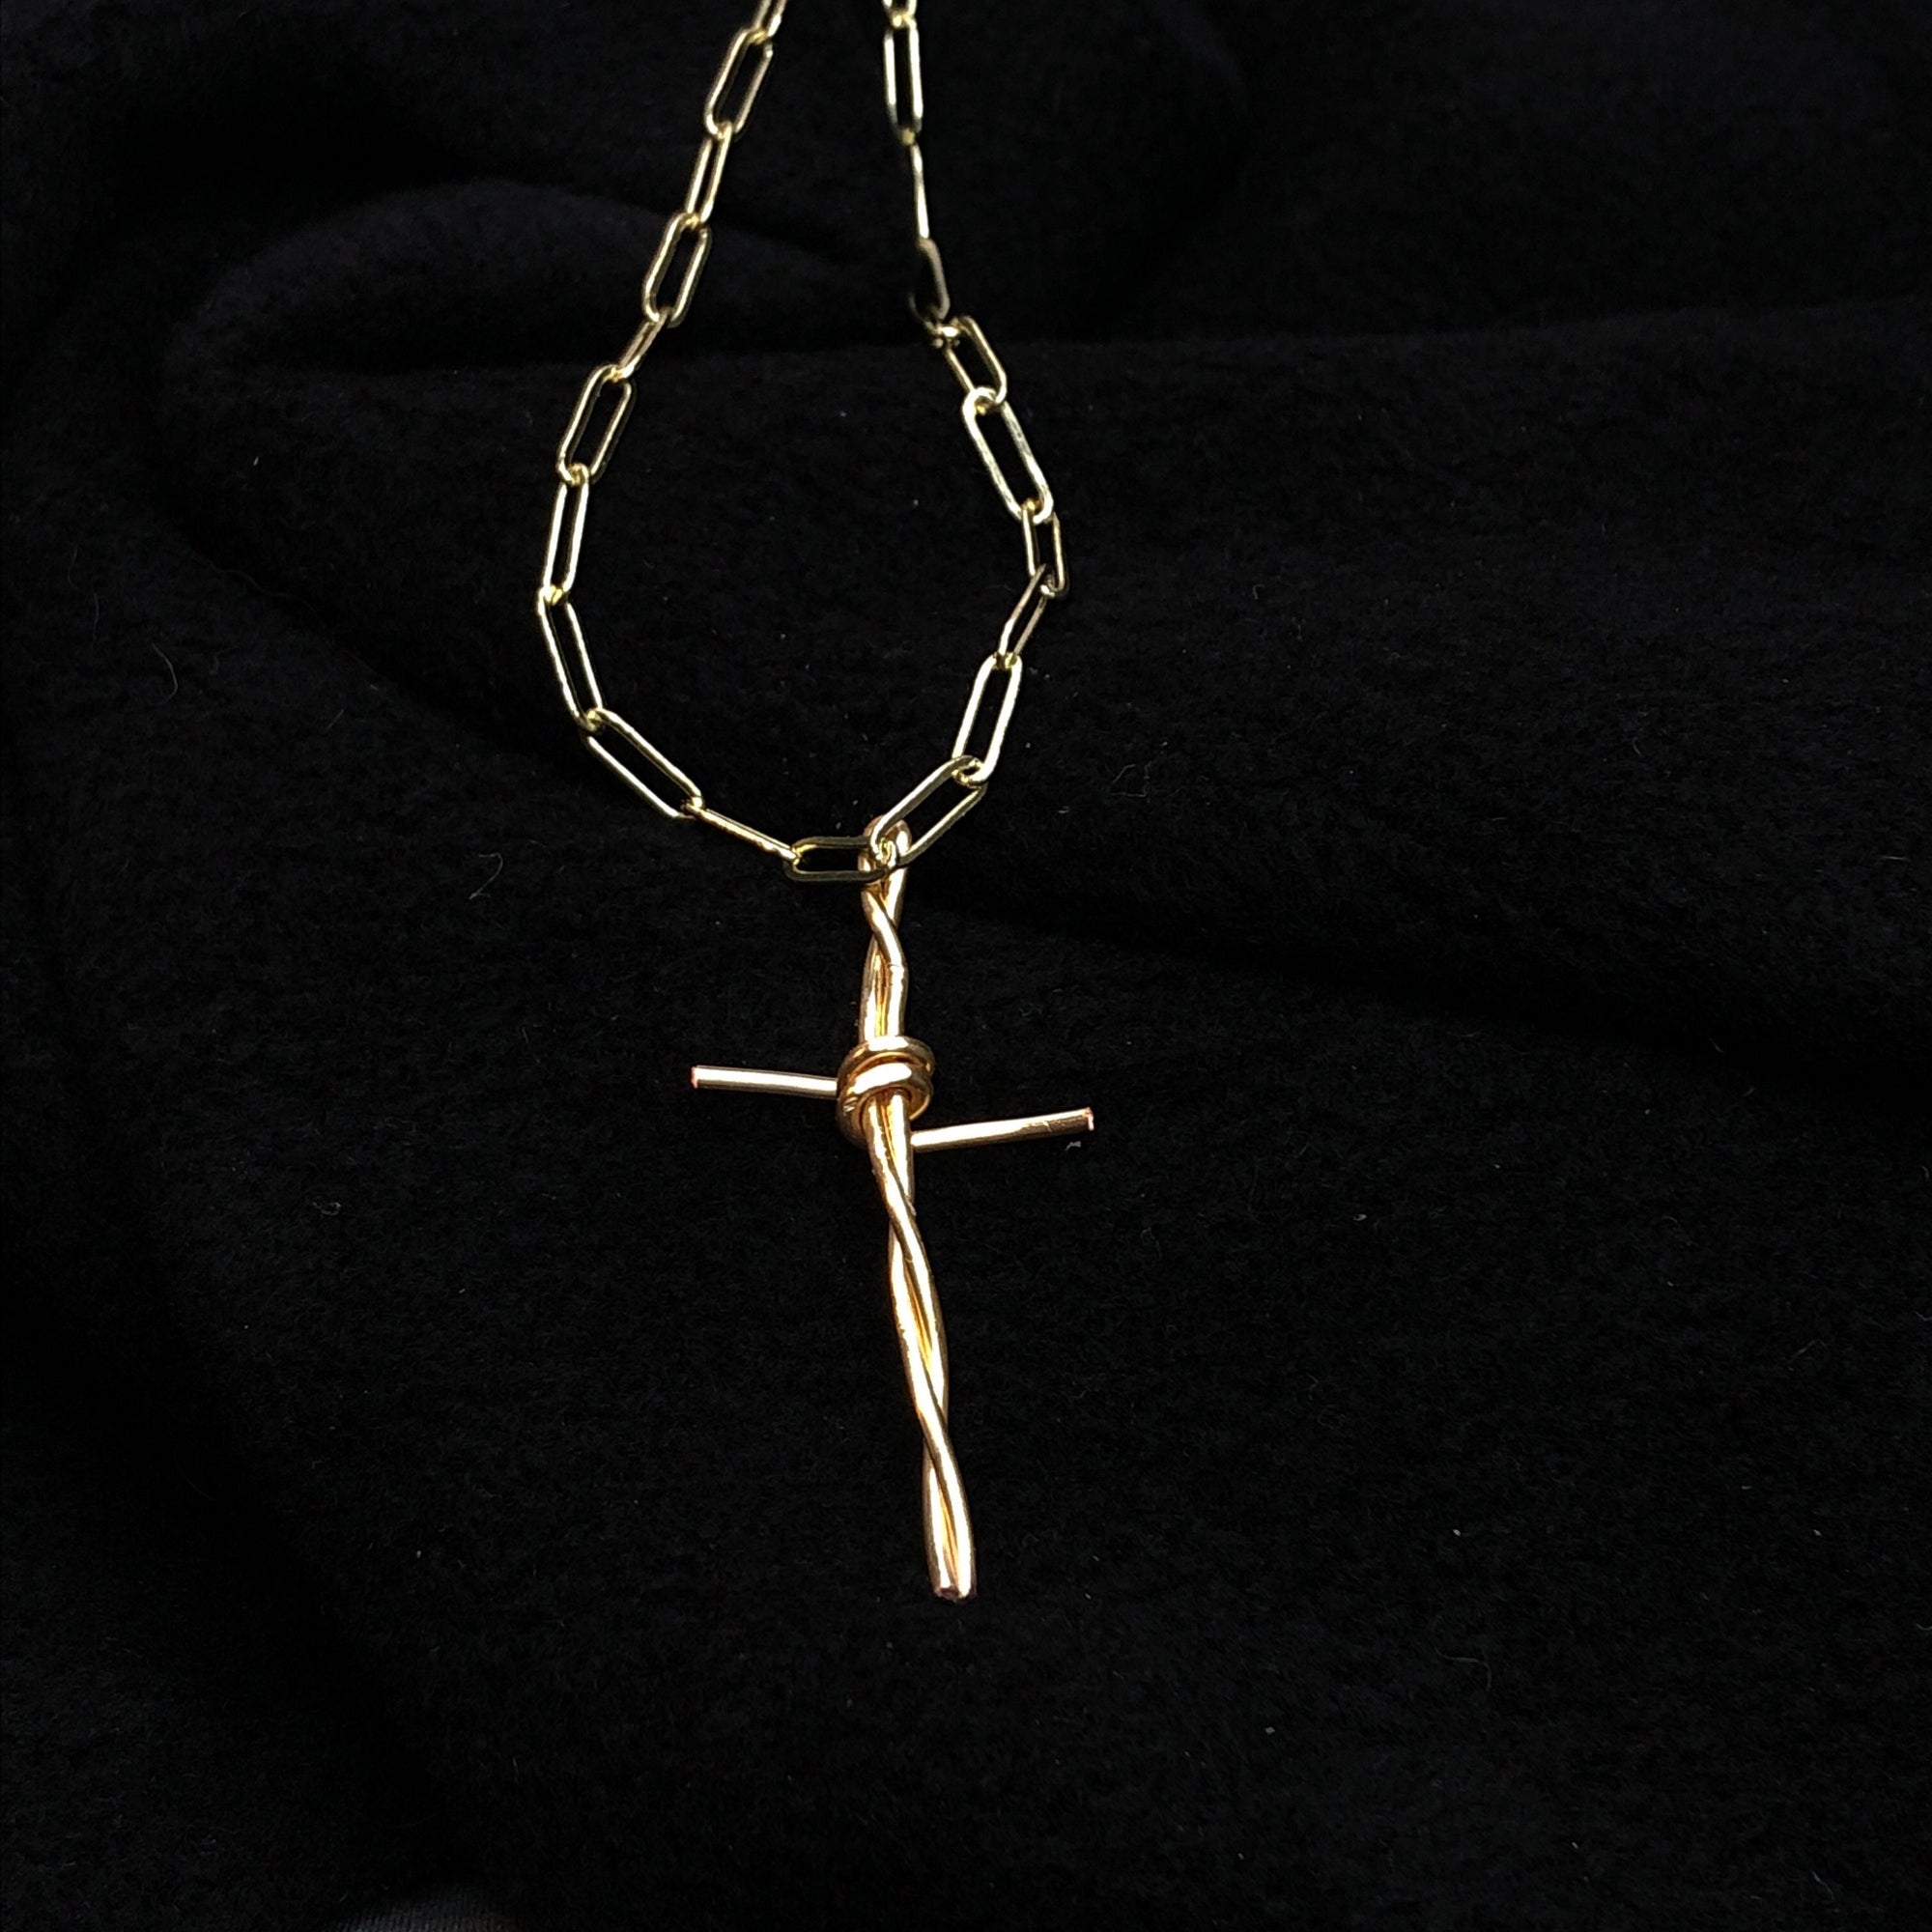 Faithful and Rustic: Cross Pendant Necklace in Gold, Silver, Rose Gold, or Black